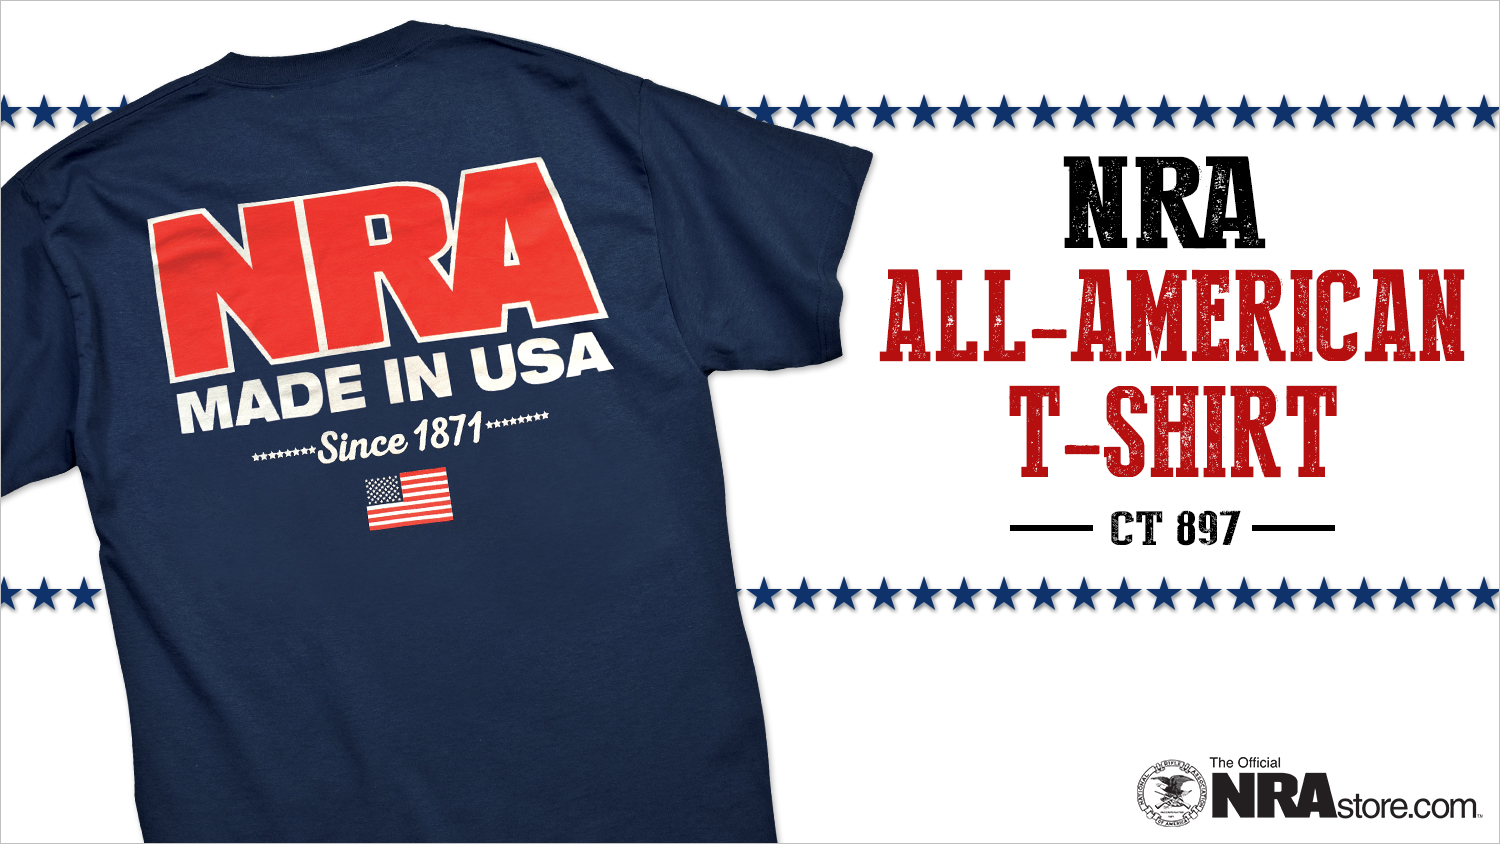 Show Off Your NRA Pride With The All-American T-Shirt